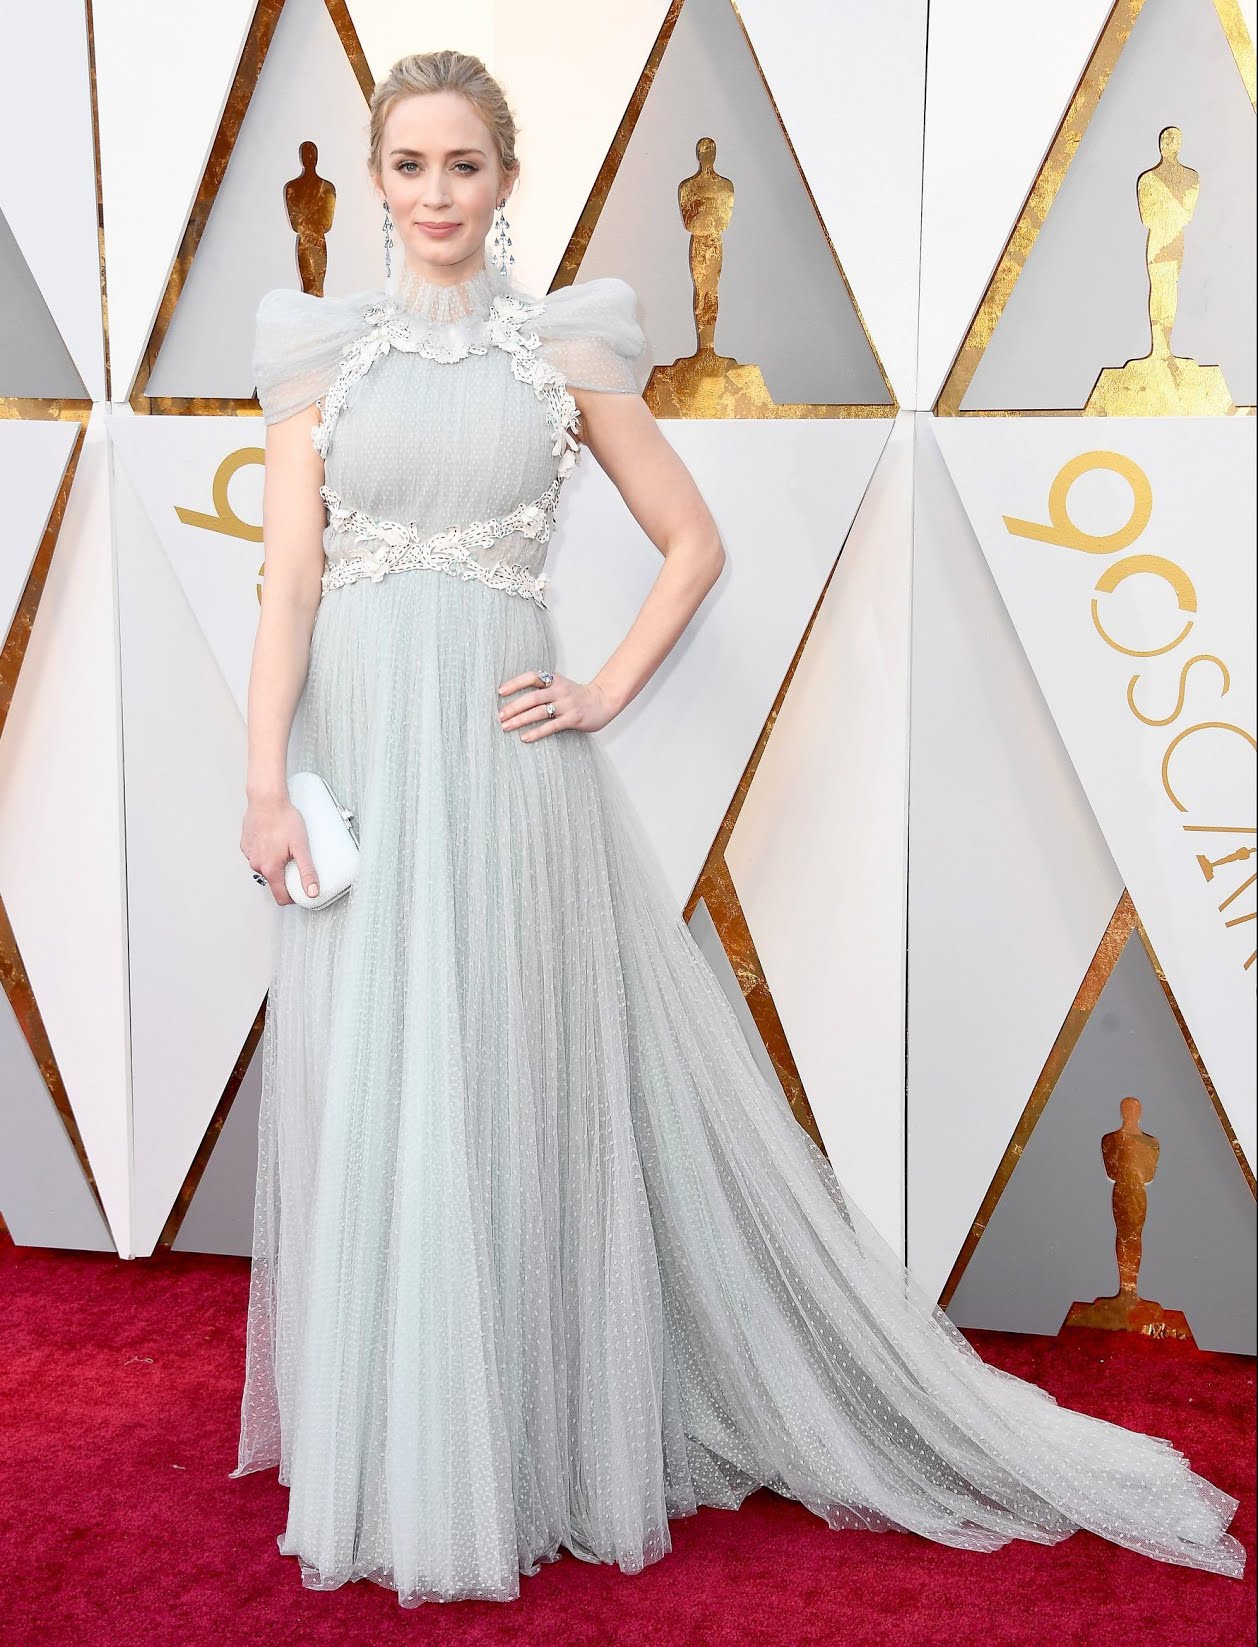 Emily Blunt at the oscars